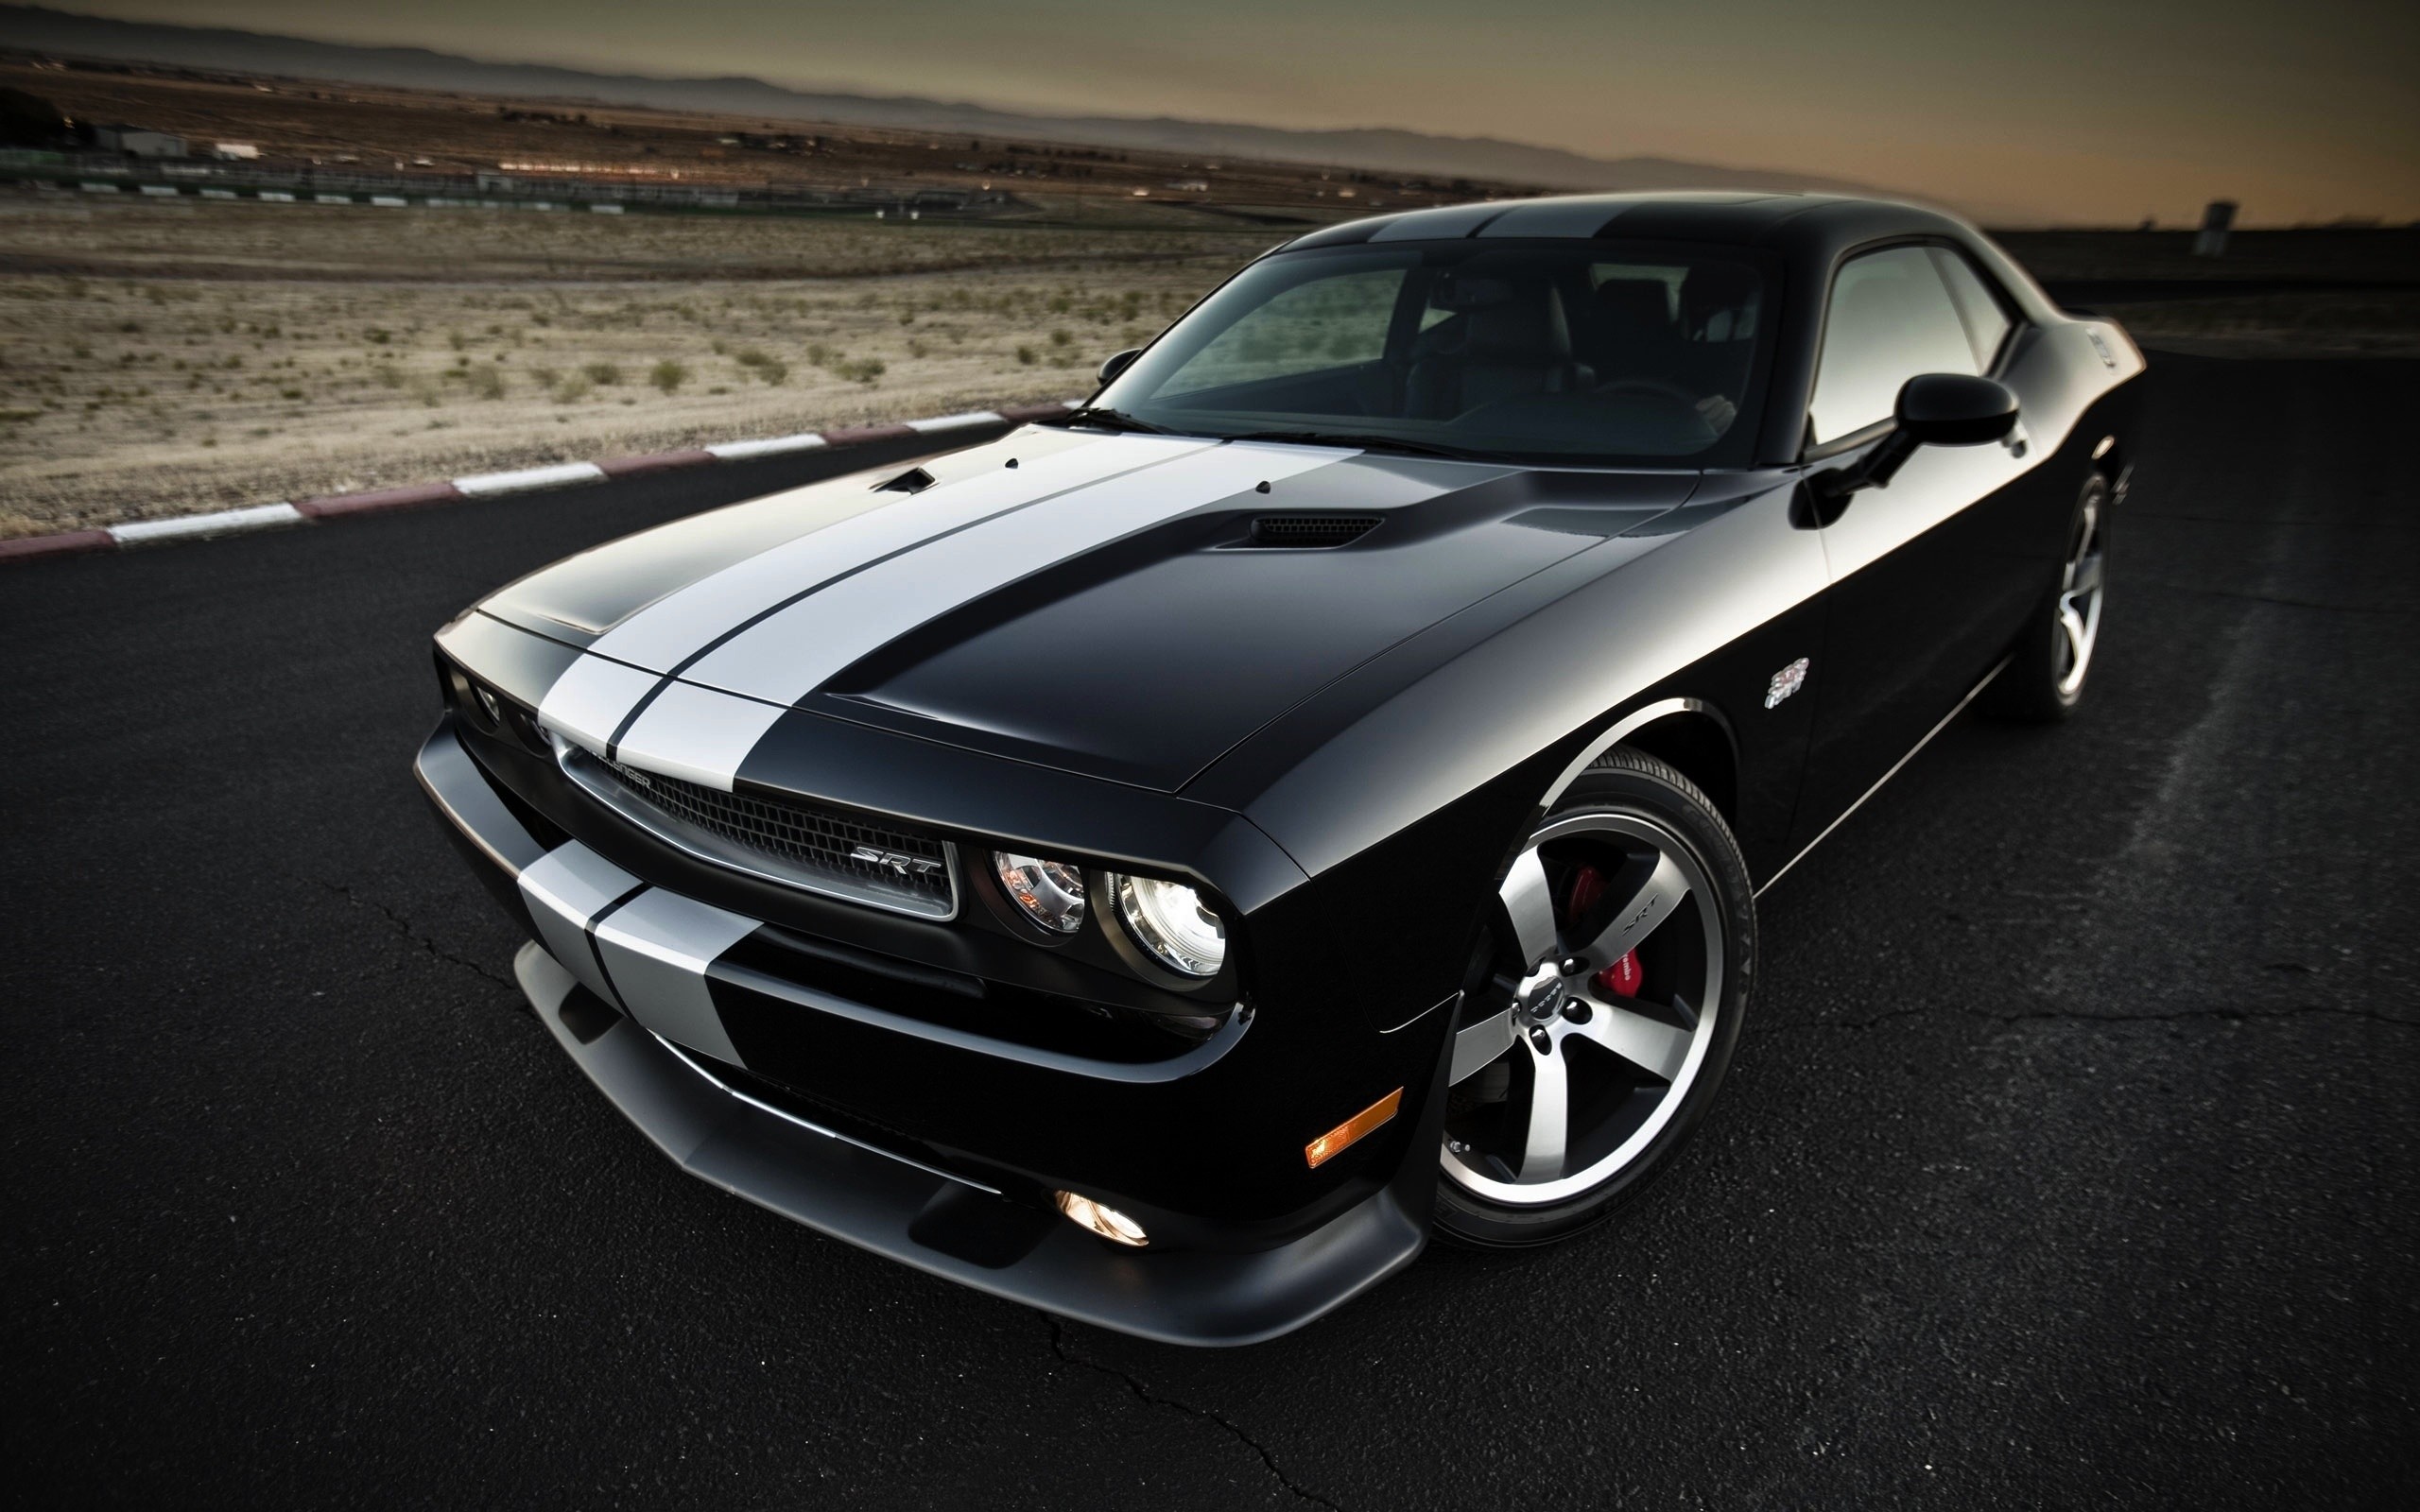 Free Download 79 Challenger Srt8 Wallpapers On Wallpaperplay 2560x1600